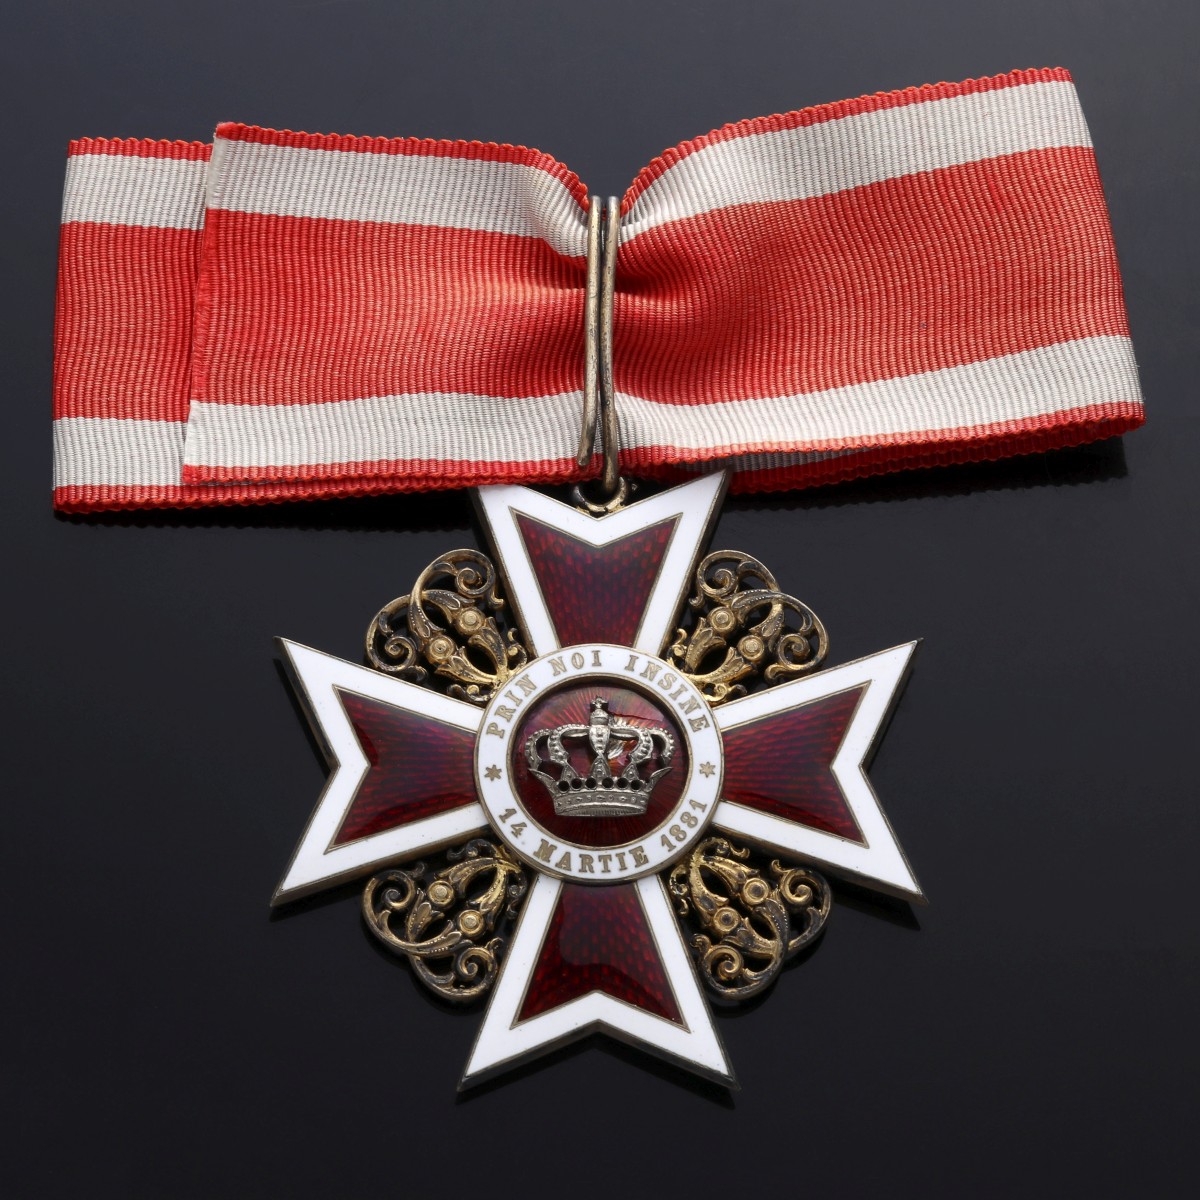 AN ORDER OF THE ROMANIAN CROWN ENAMELED BADGE